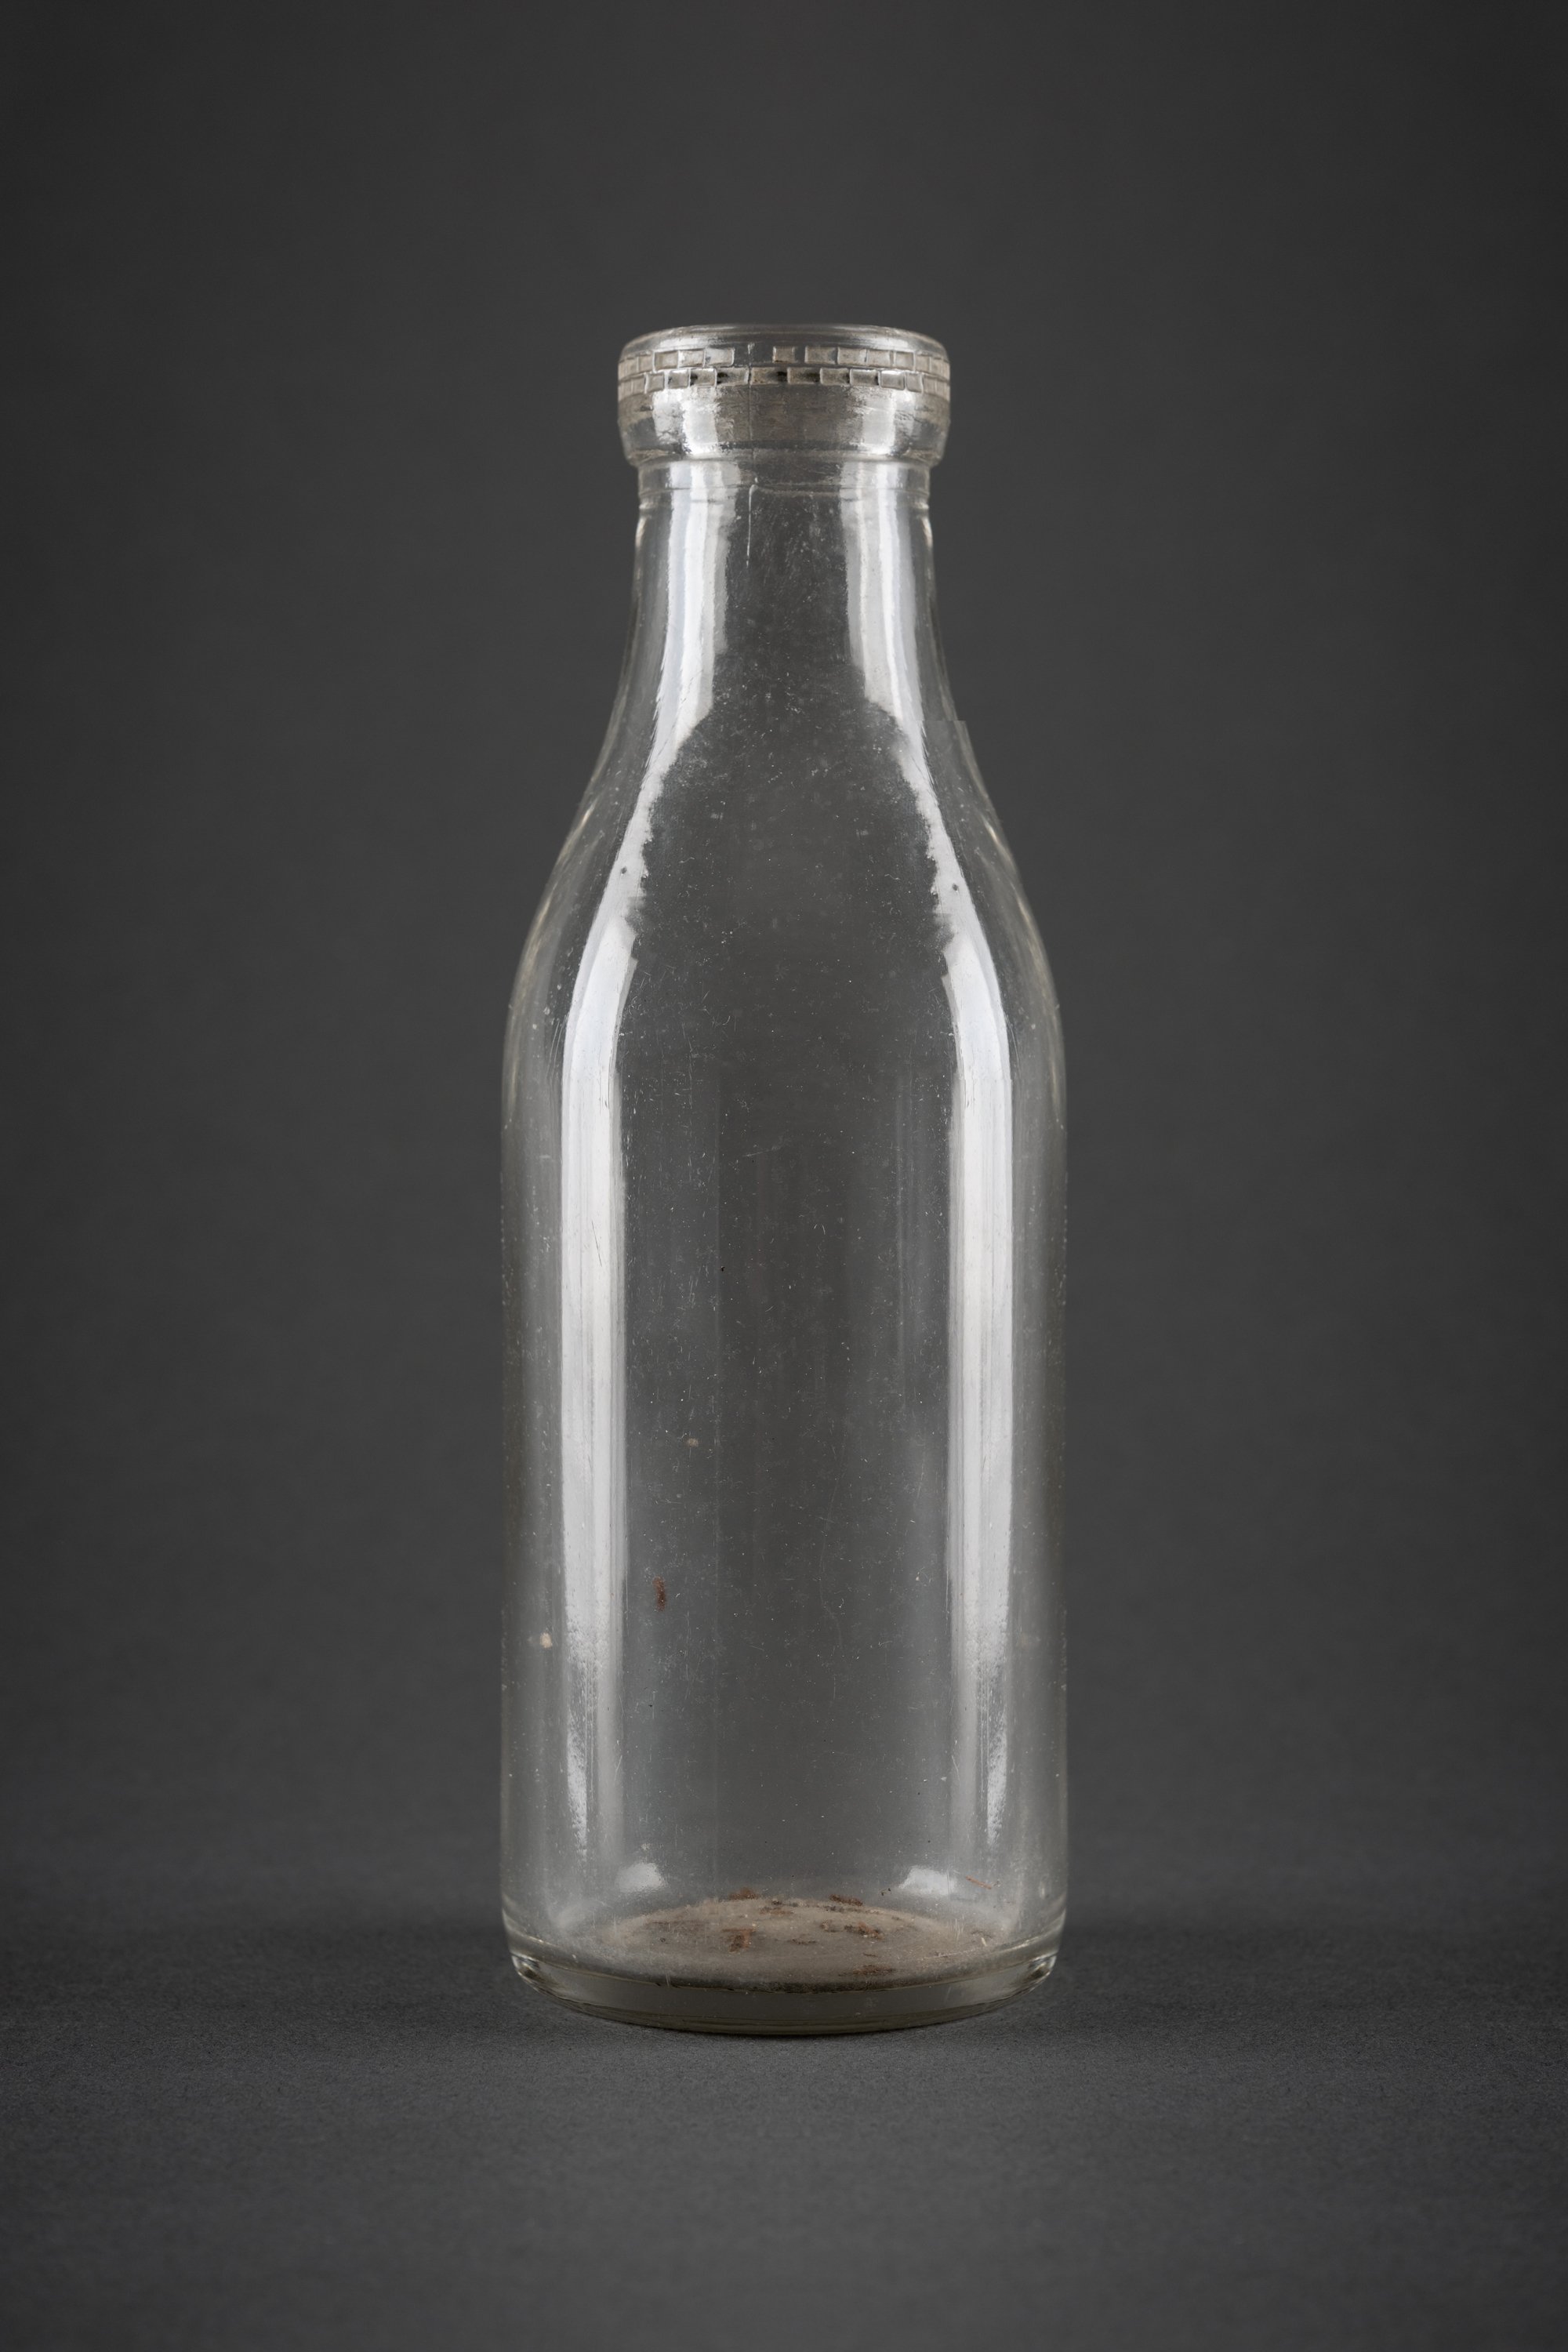 Milchflasche (Stadtmuseum Kassel CC BY-NC-SA)